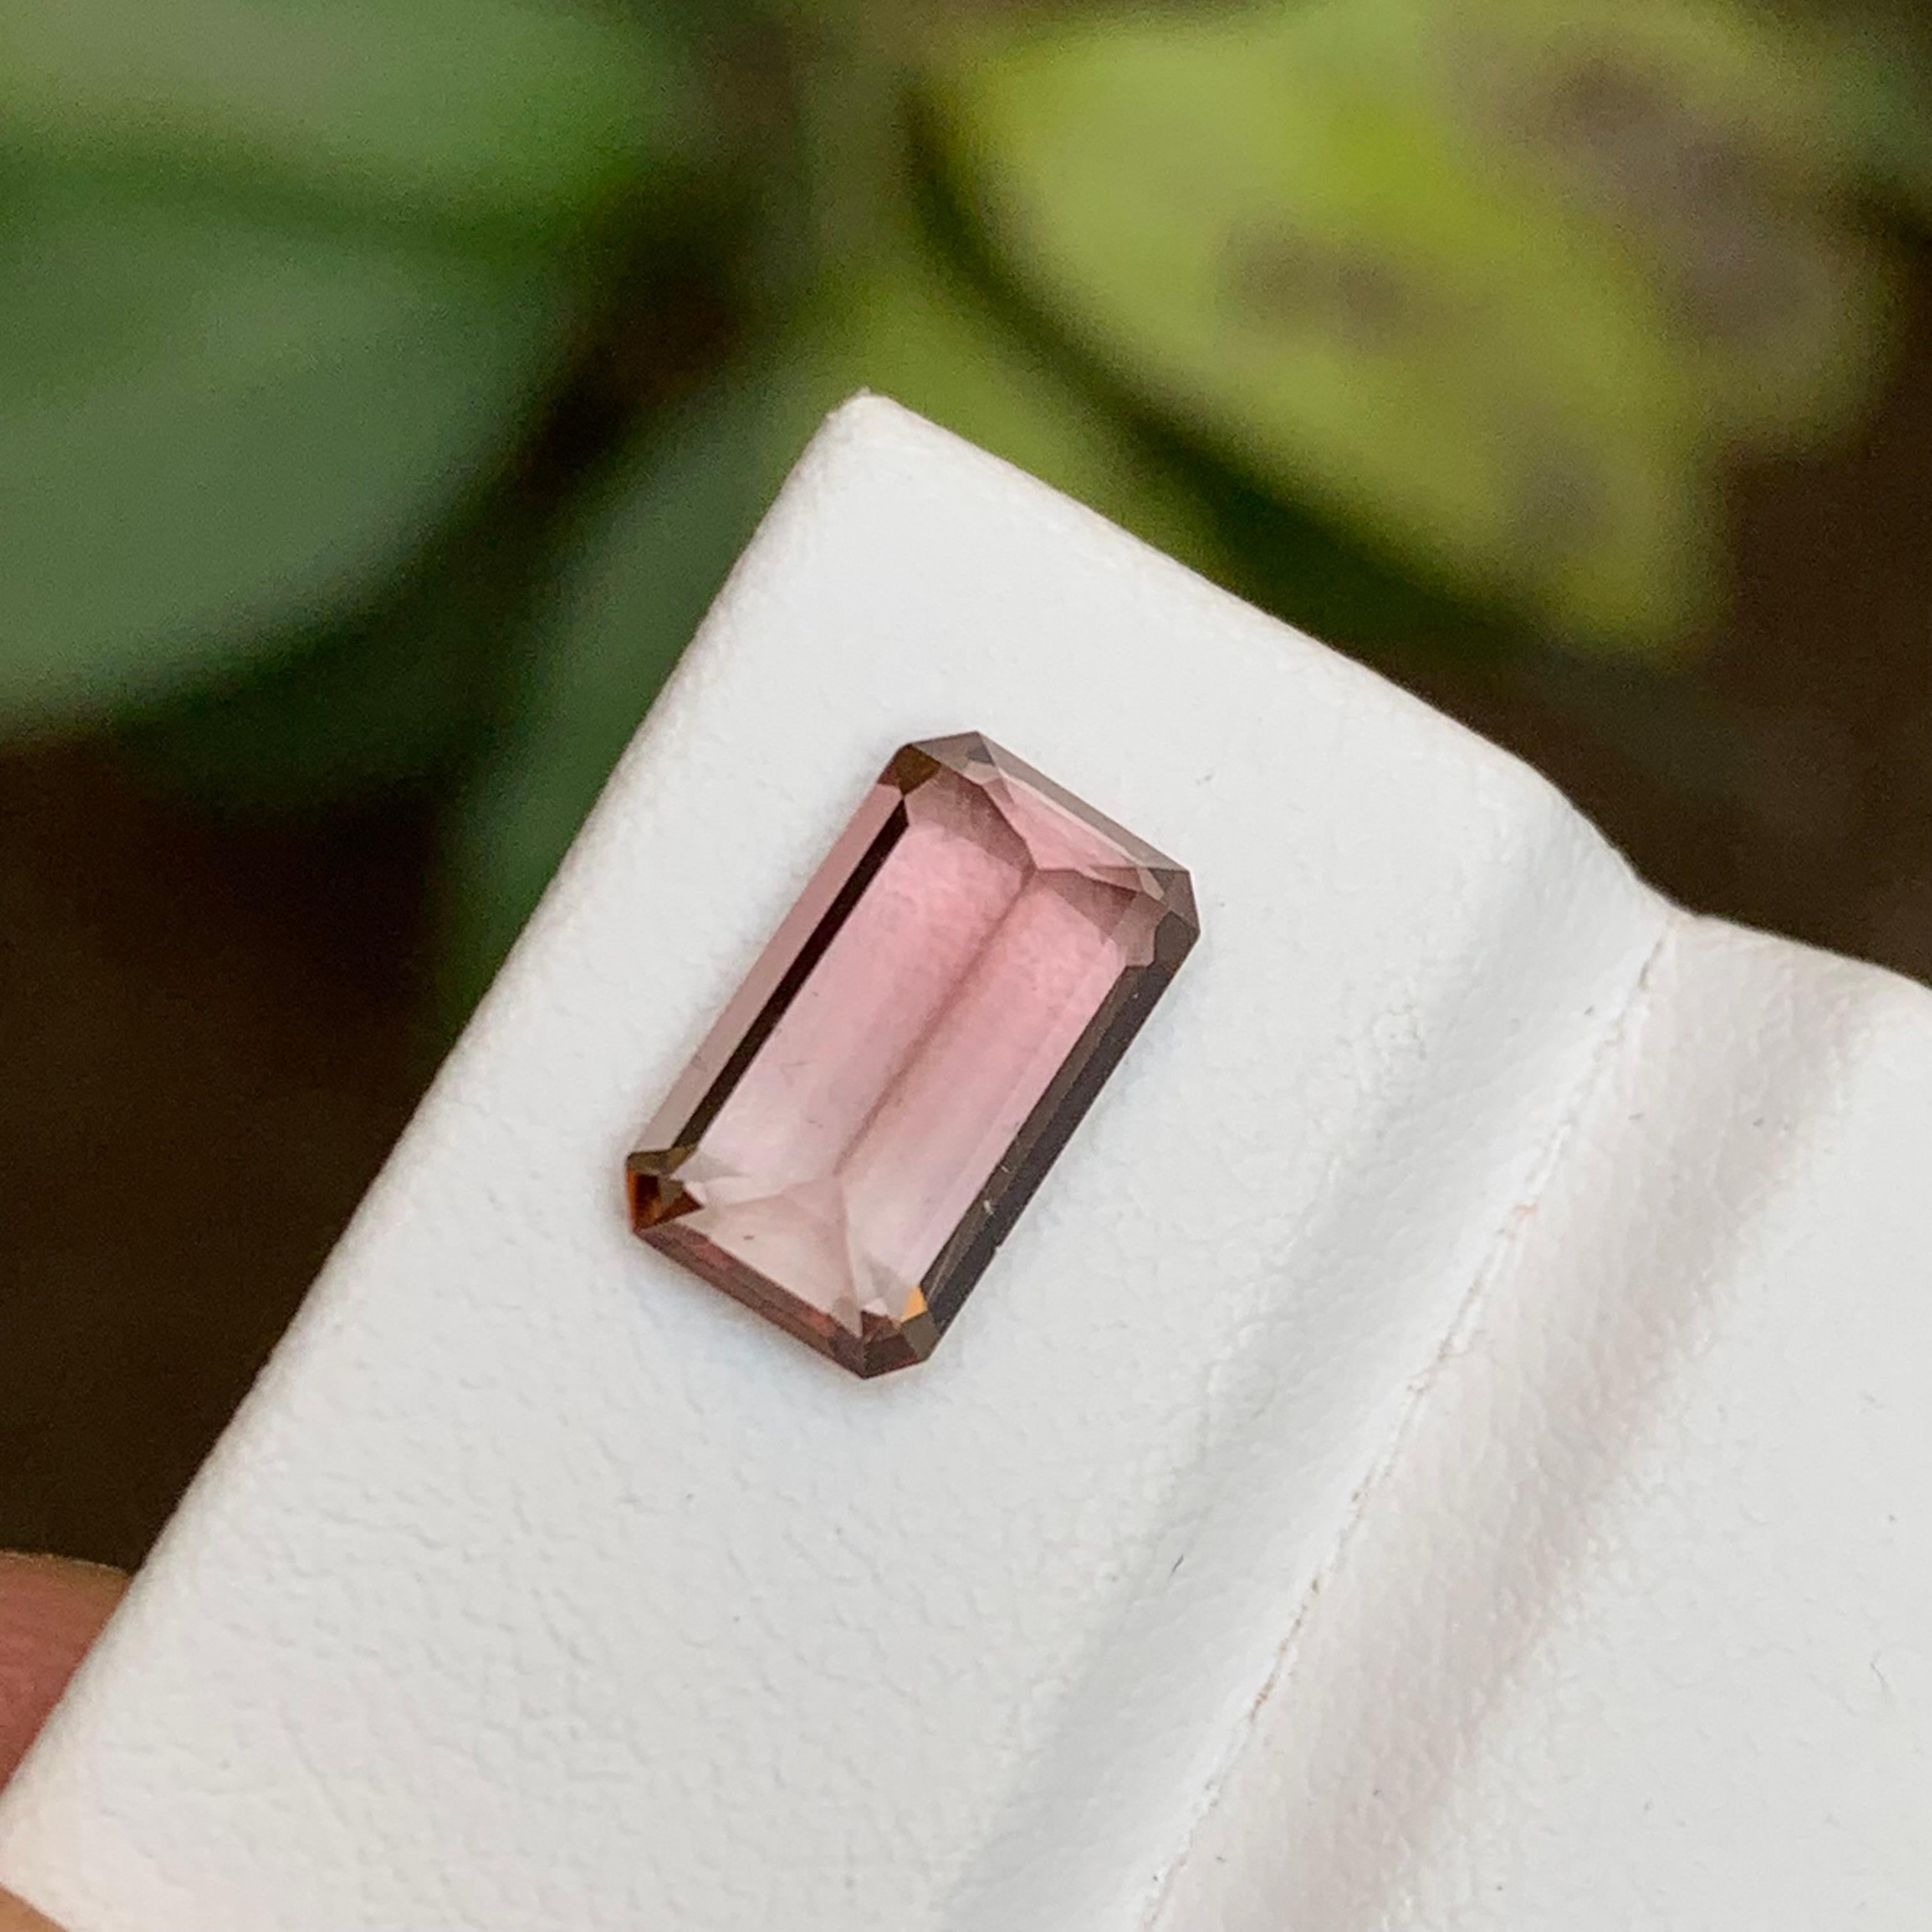 Rare Pink Natural Tourmaline Loose Gemstone 2.45 Ct Emerald Cut for Ring/Pendant For Sale 1